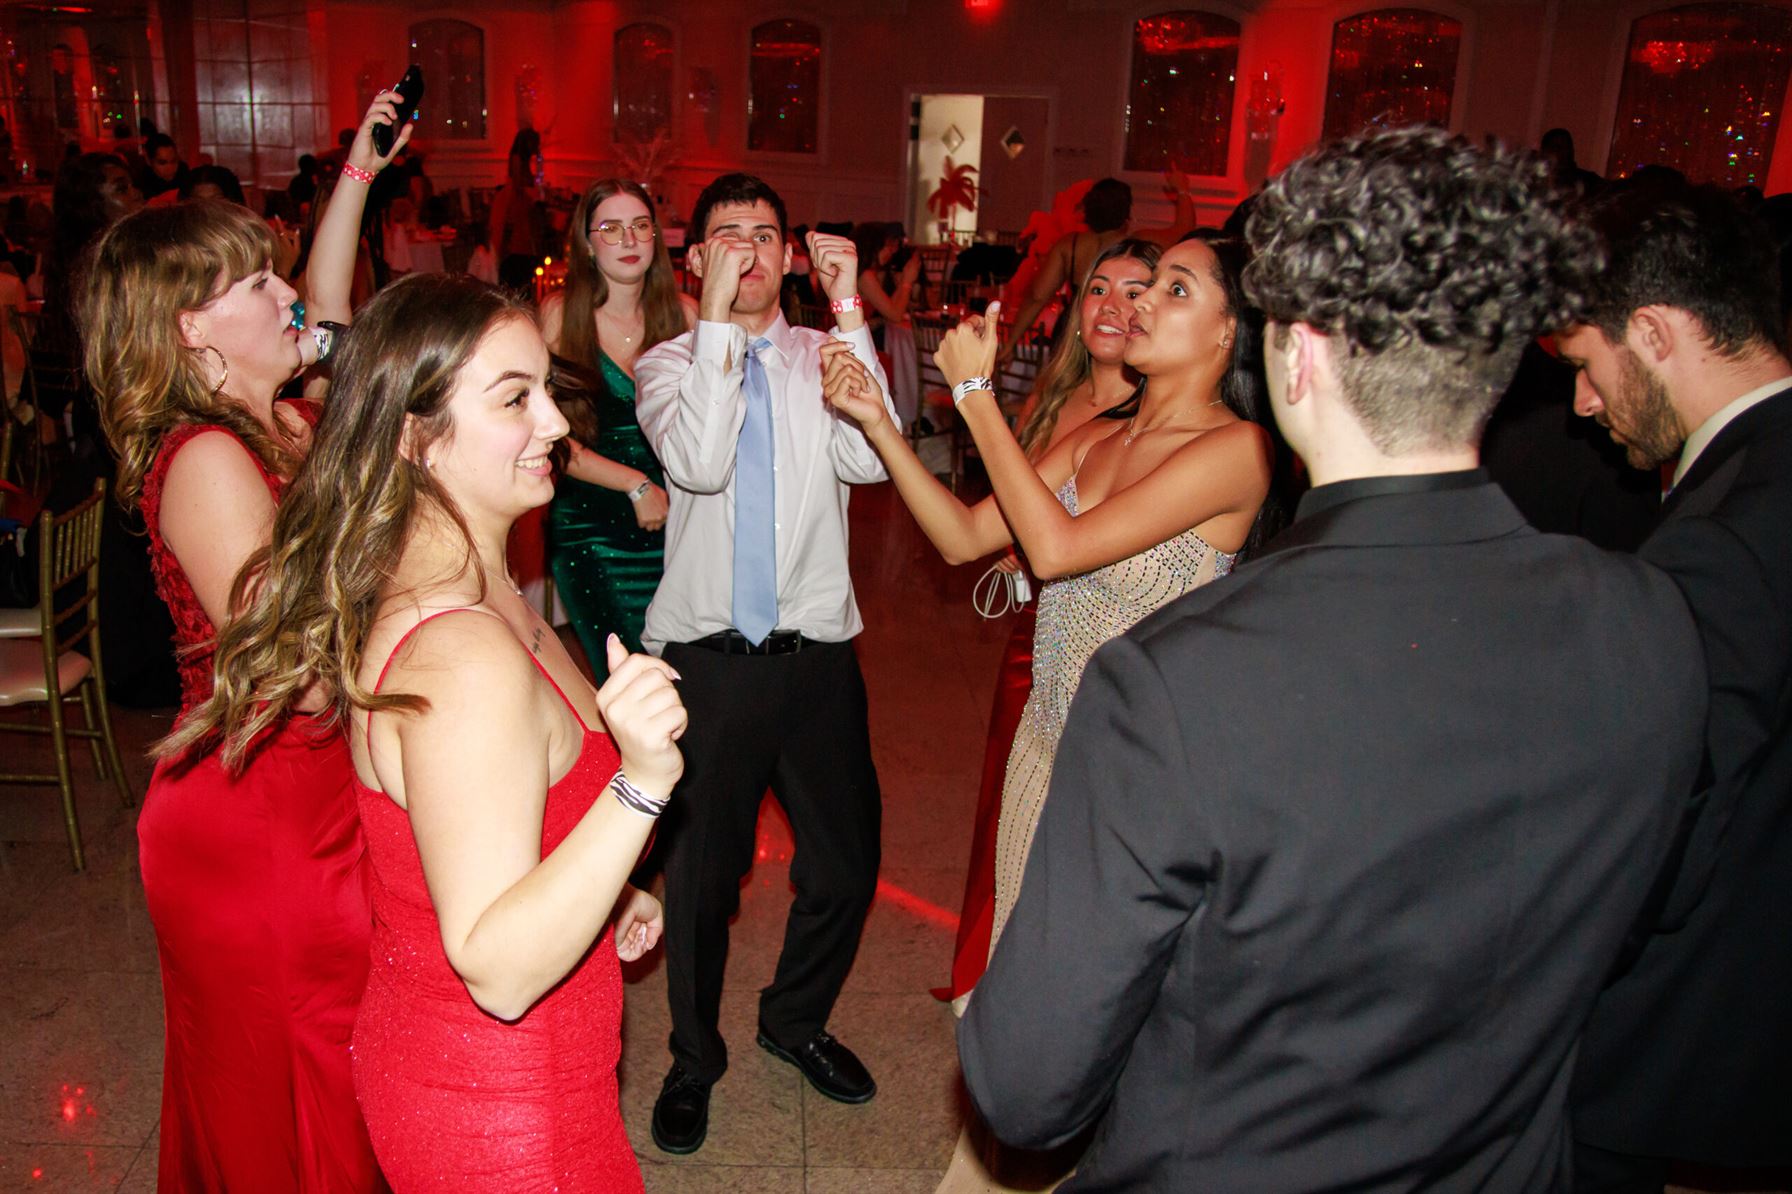 Students dance in a circle during SLAM's Winter Gala at The Royal Manor in Garfield, N.J. Sal DiMaggio | The Montclarion